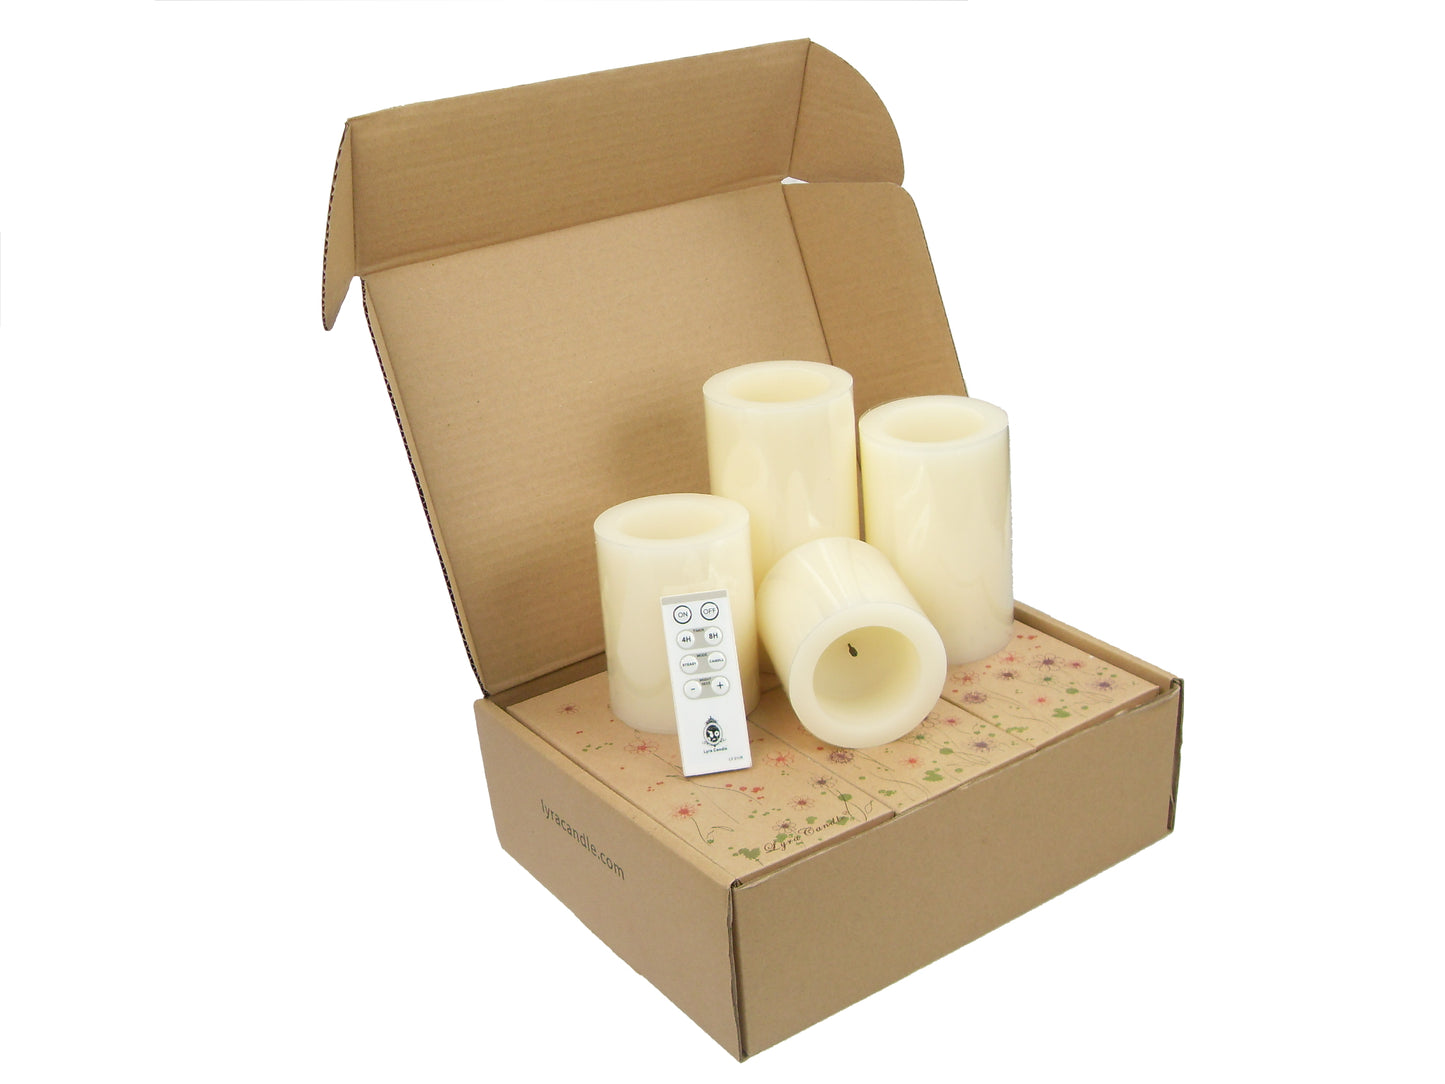 Ivory Flameless Real Wax Candles with Remote 4, 5, 6, and 8-Inch Unscented LED Candles of 4, Pack of 3 (Total 12 Candles)